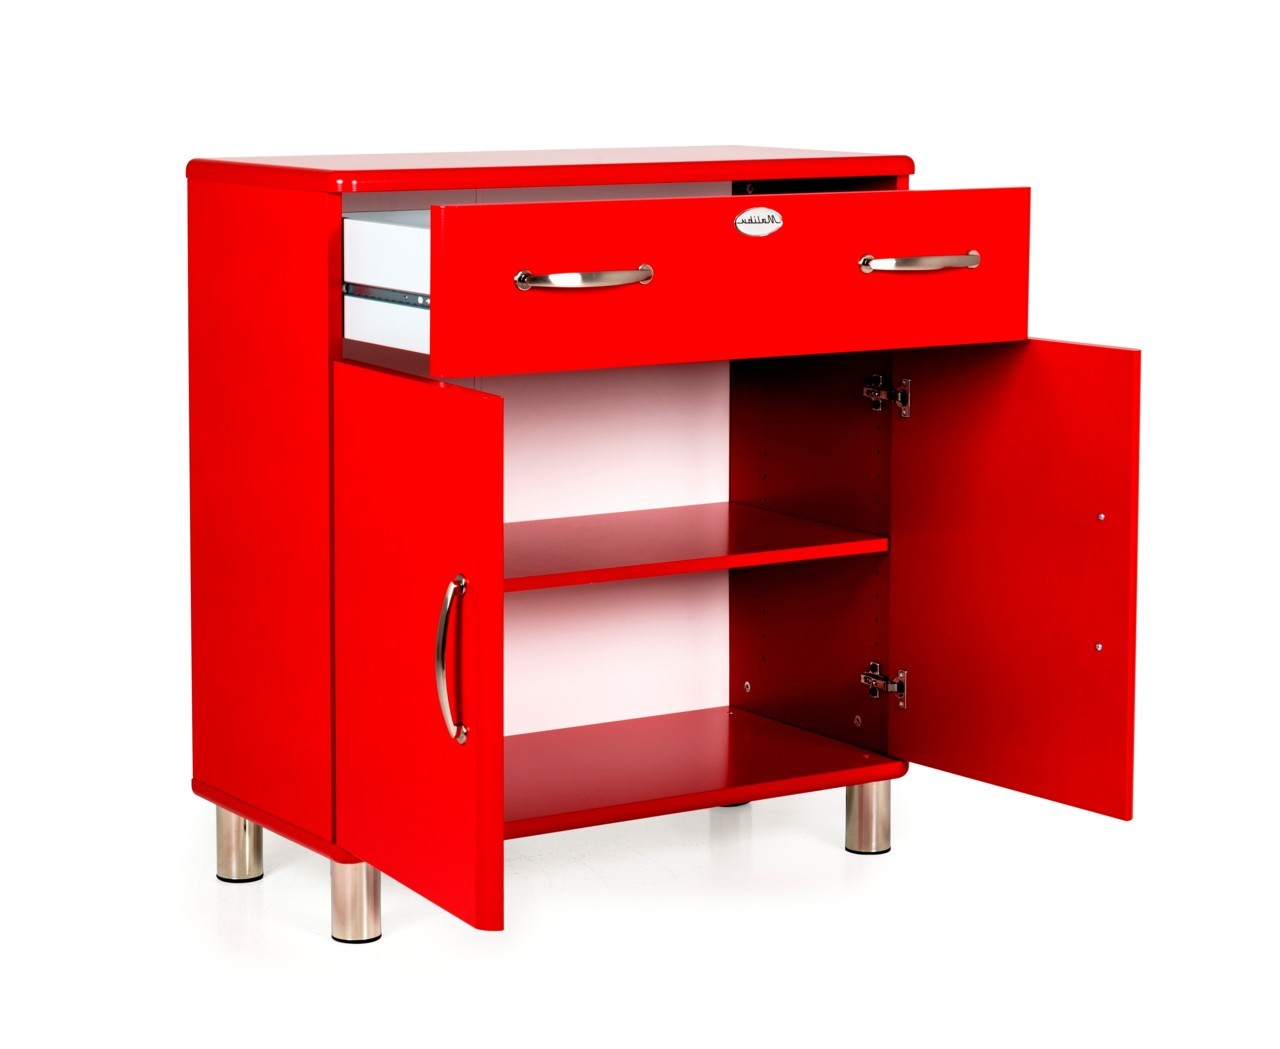 Small red HOP sideboard